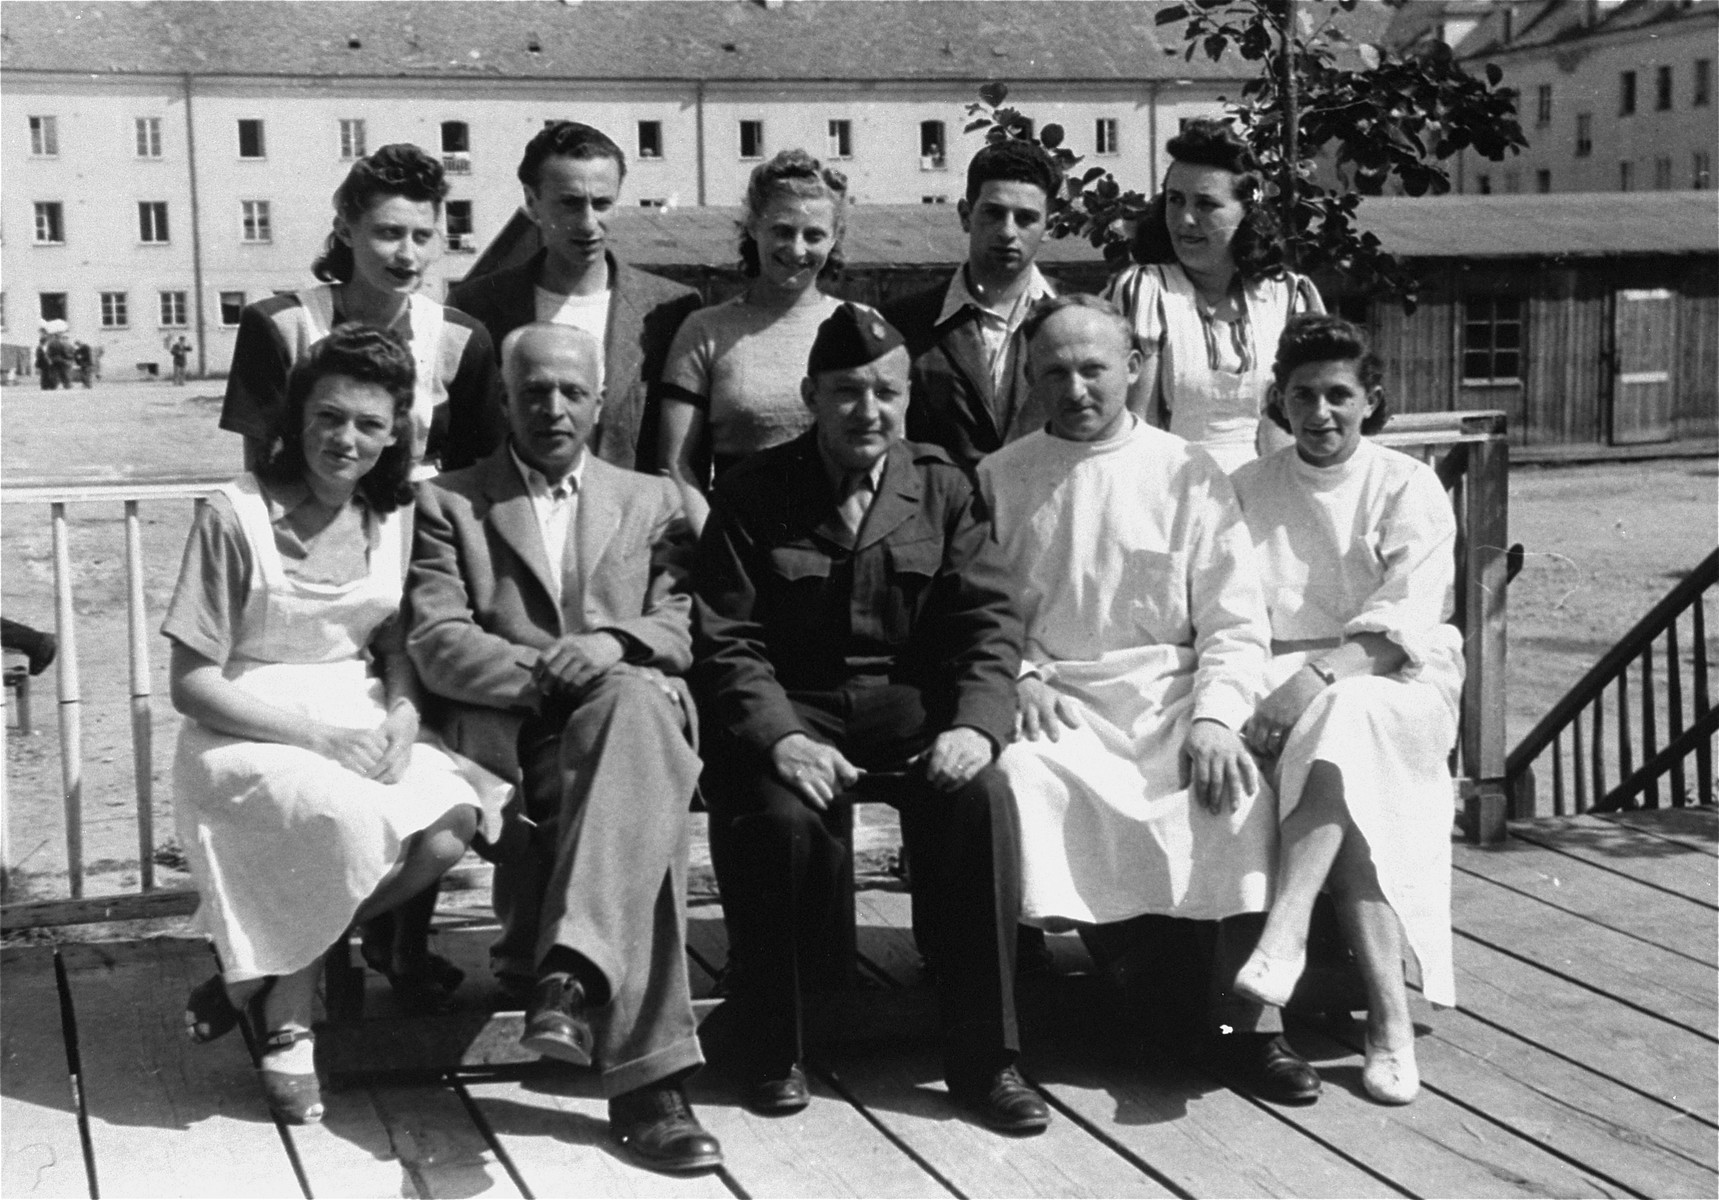 UNRRA workers in the Bindermichl DP camp.

Among those pictured is Dr. Gerson Elber (front row, second from the right).